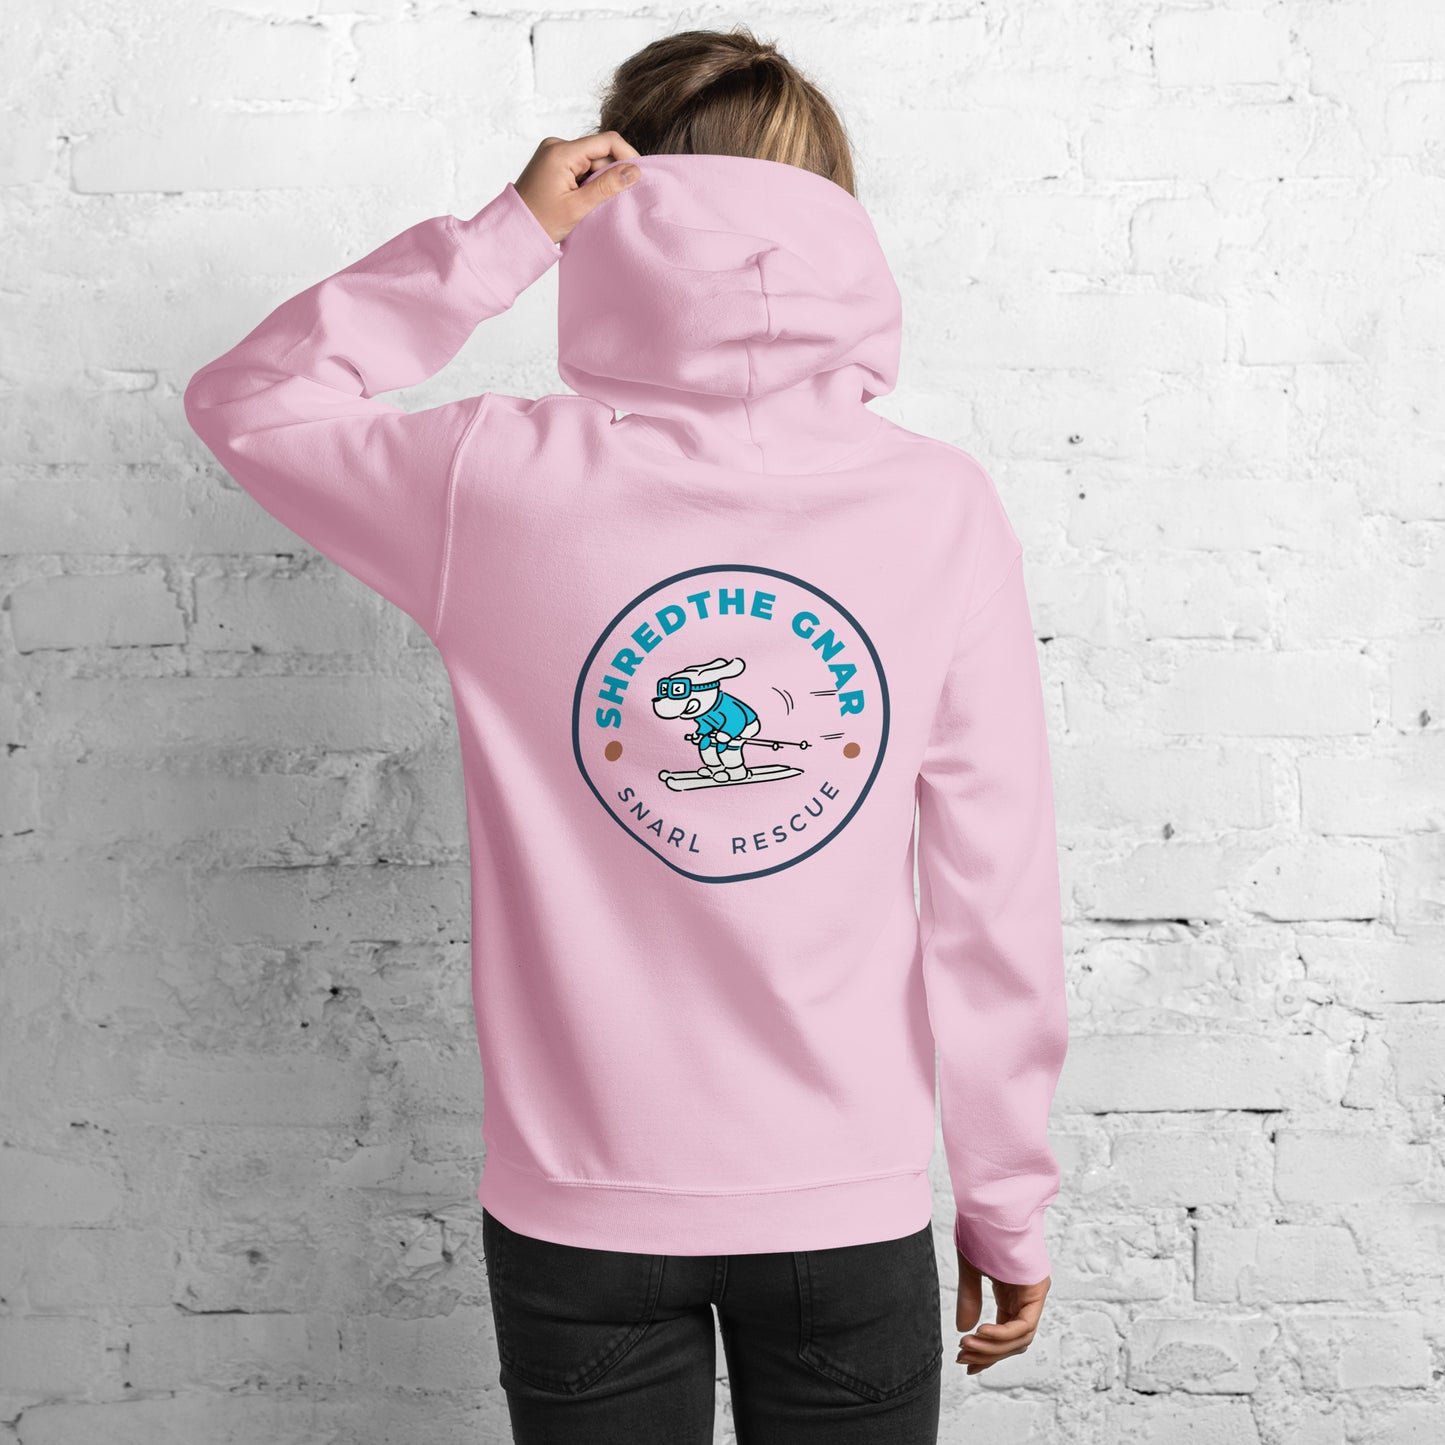 The "Shred the Gnar" Hoodie